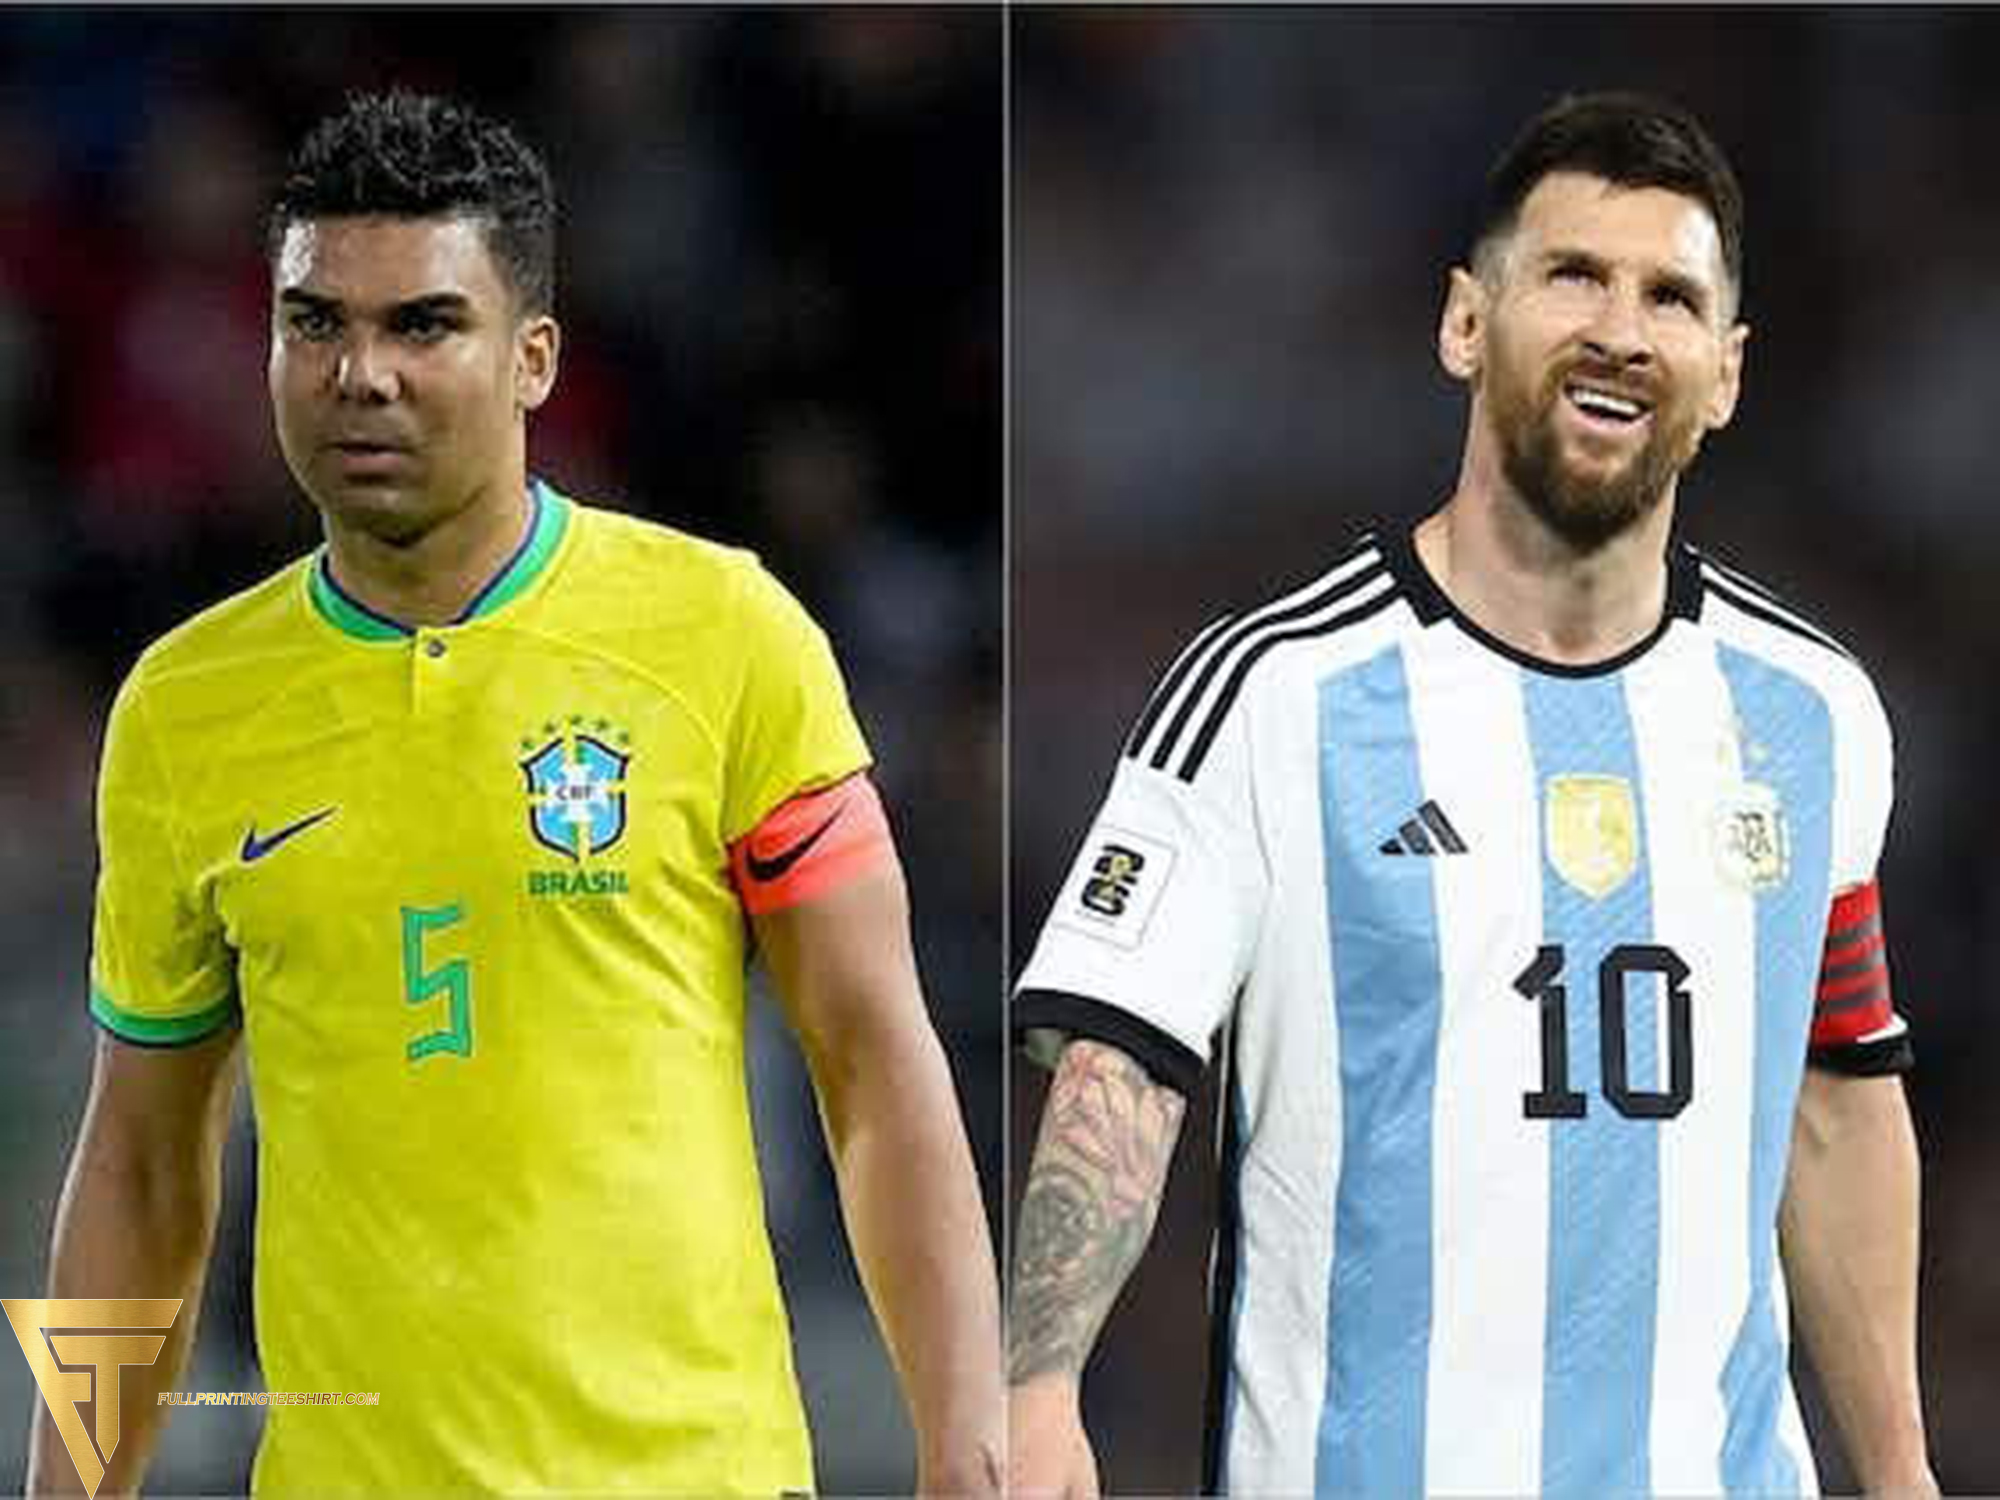 The Battle of Legends Brazil vs. Argentina in the 2026 World Cup Qualifiers